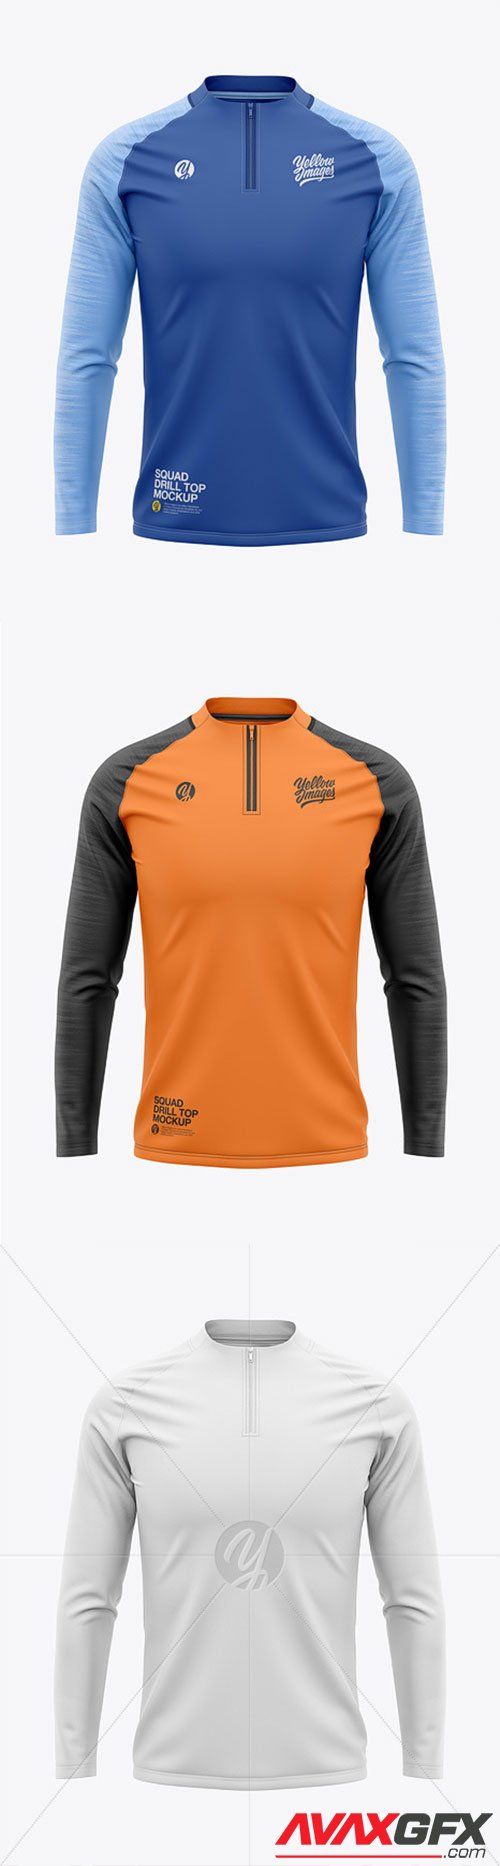 Download Men S Squad Drill Soccer Top Back View Soccer Training Jersey 62796 Avaxgfx All Downloads That You Need In One Place Graphic From Nitroflare Rapidgator